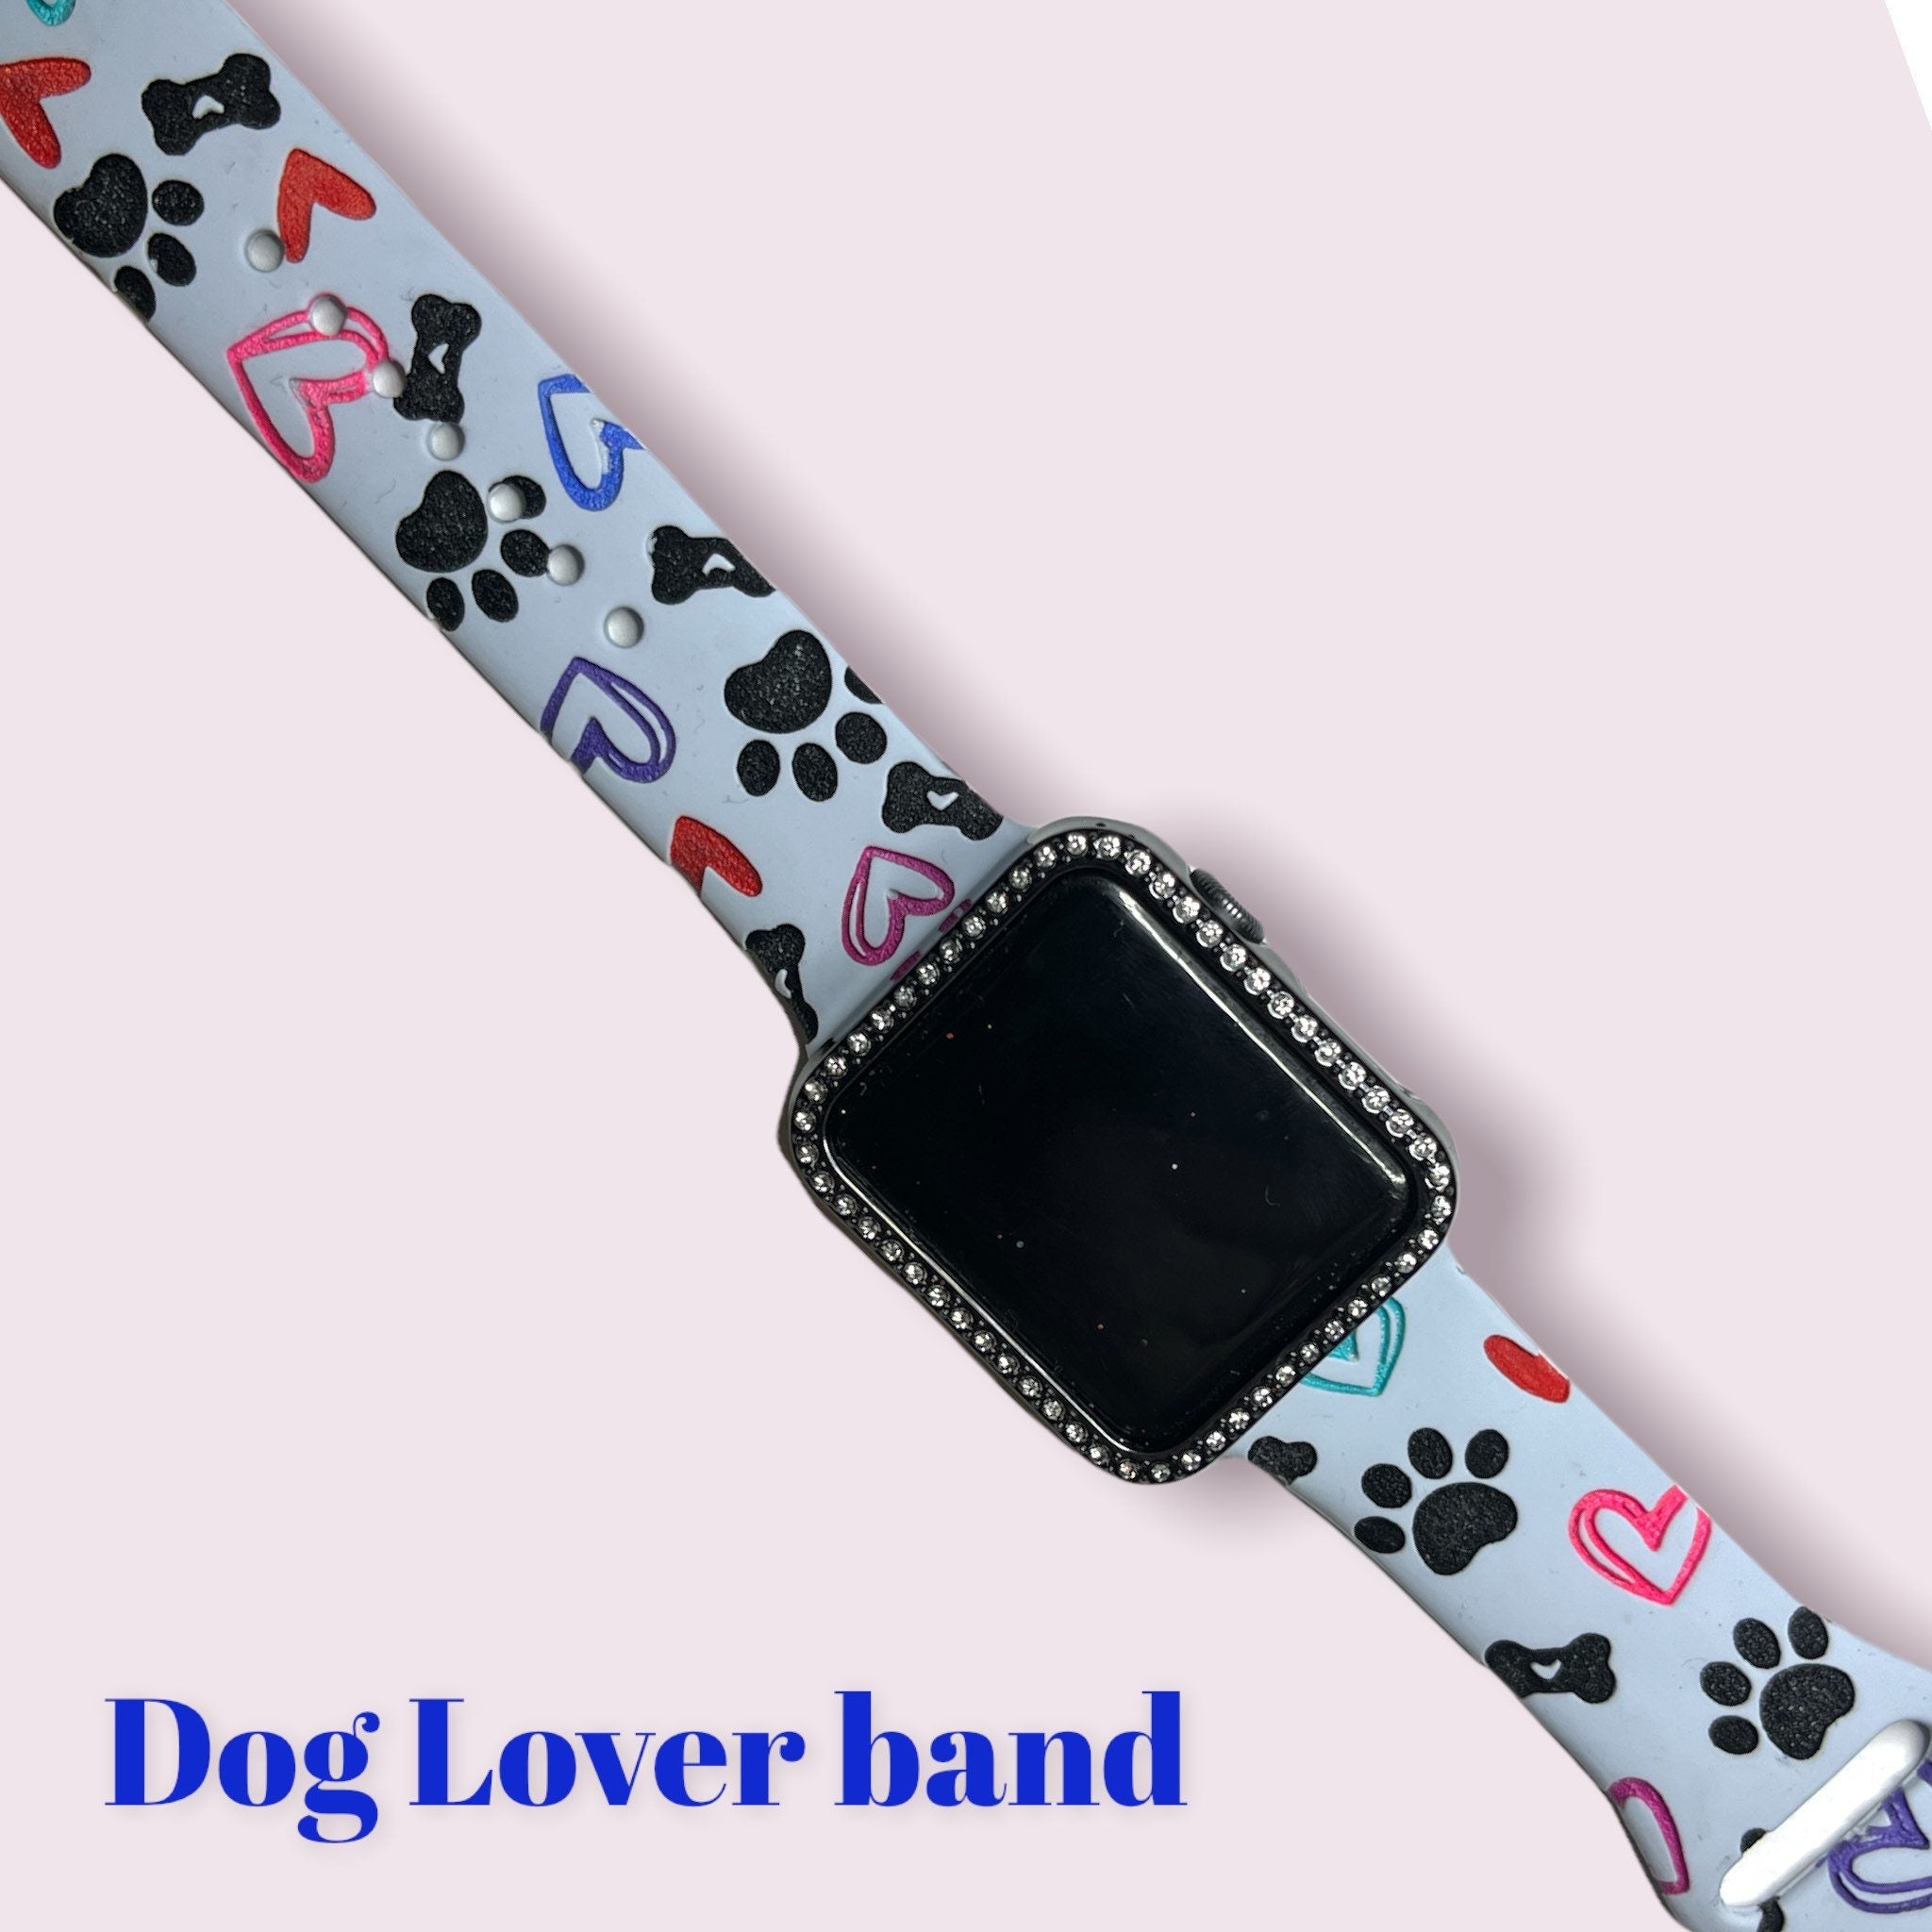 Dog Lovers band, laser engraved smartwatch band, samsung galaxy, Fitbit versa 2, Fitbit Versa 3,gift for woman